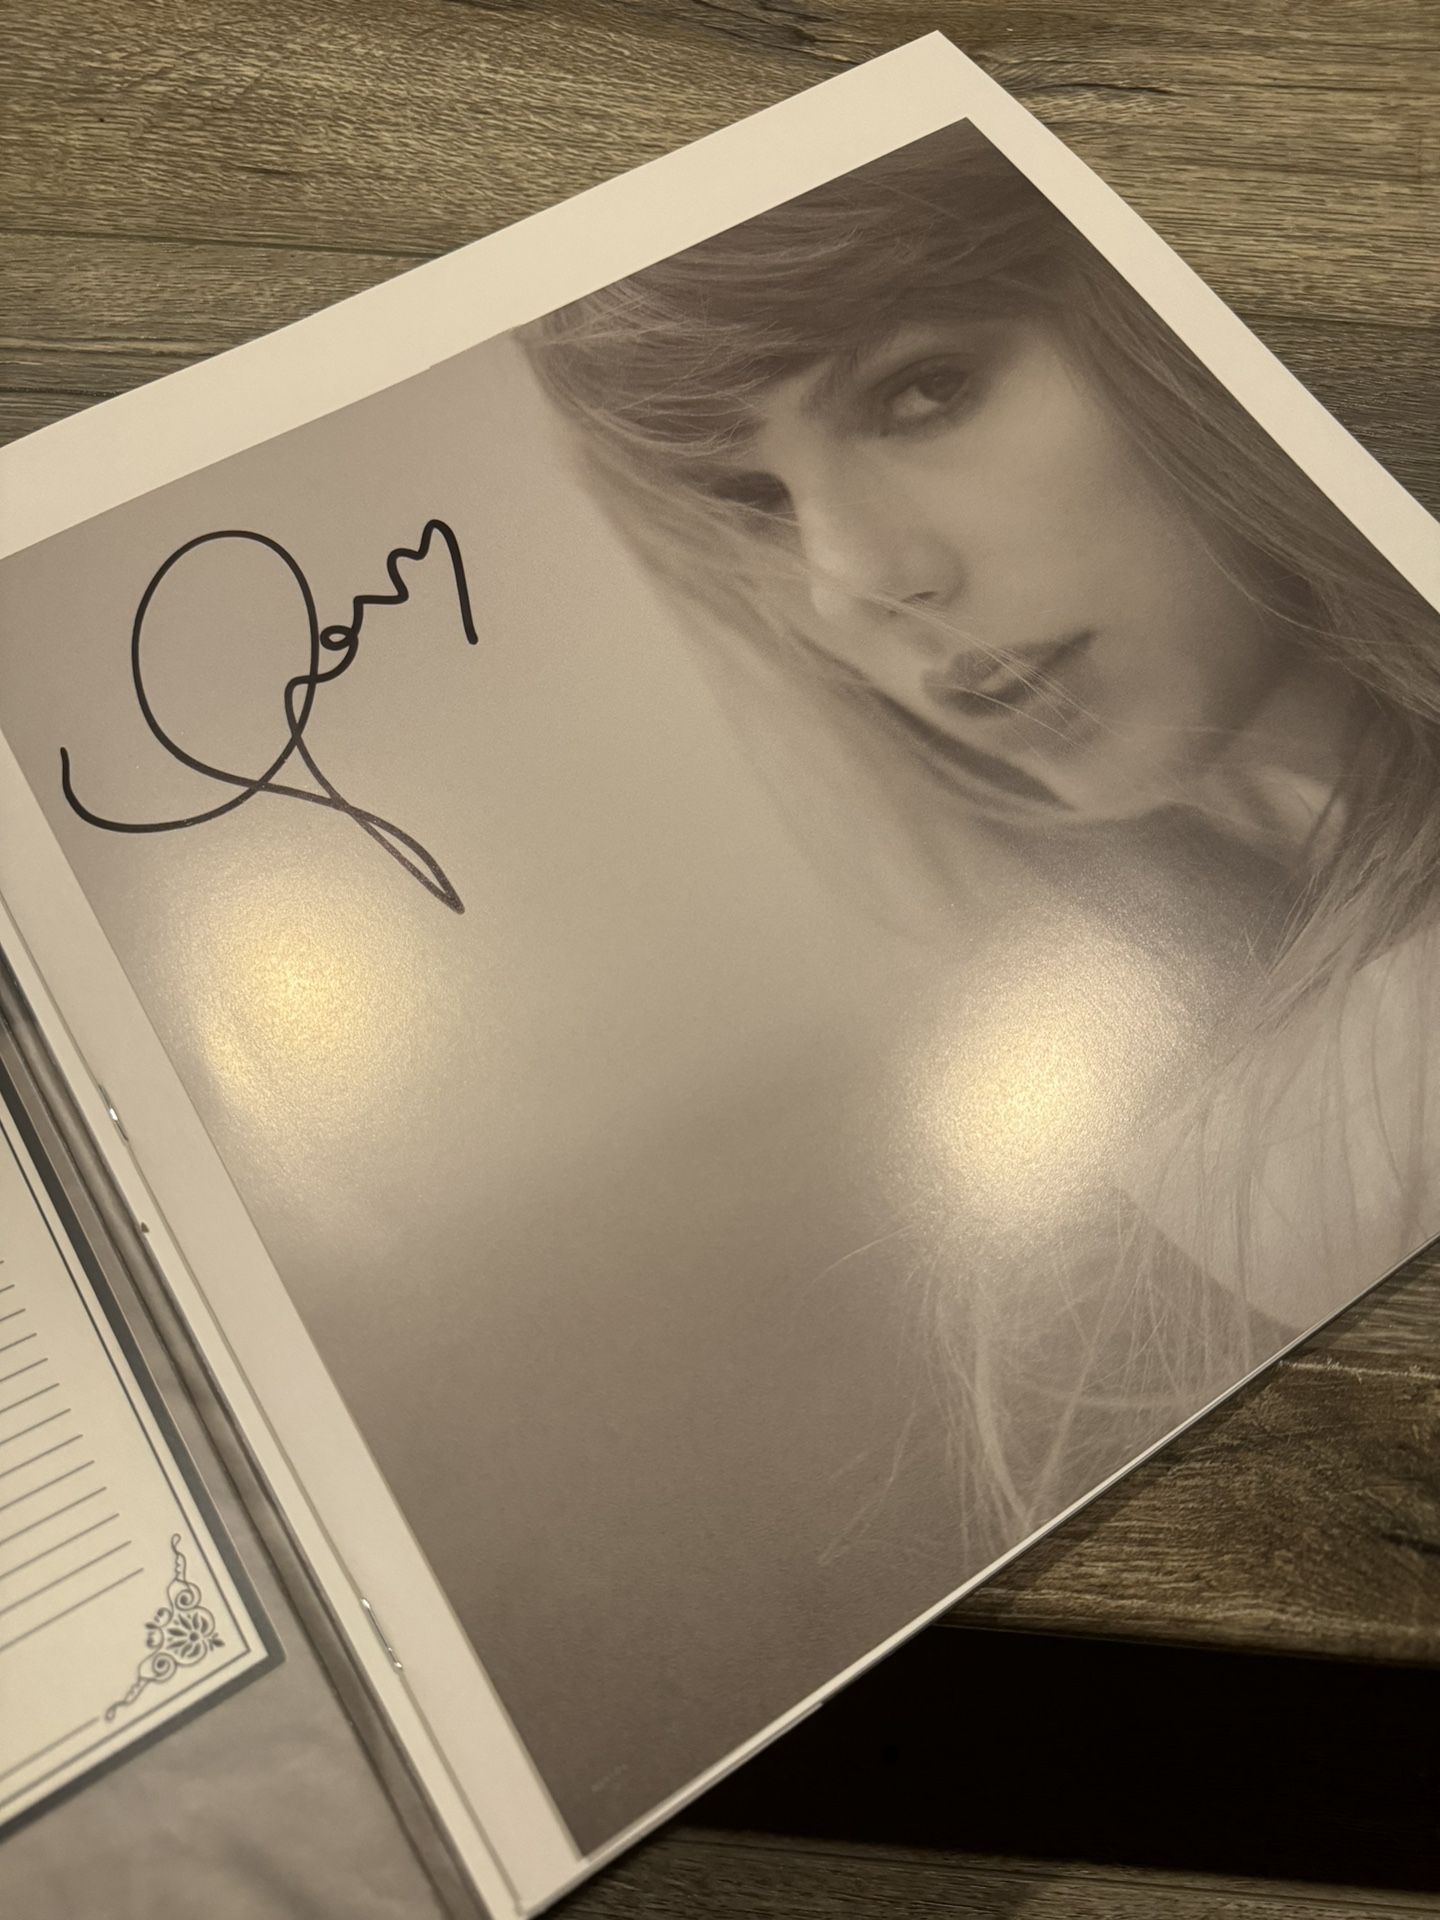 Taylor Swift The Tortured Poets Department Vinyl w/ Signed Insert